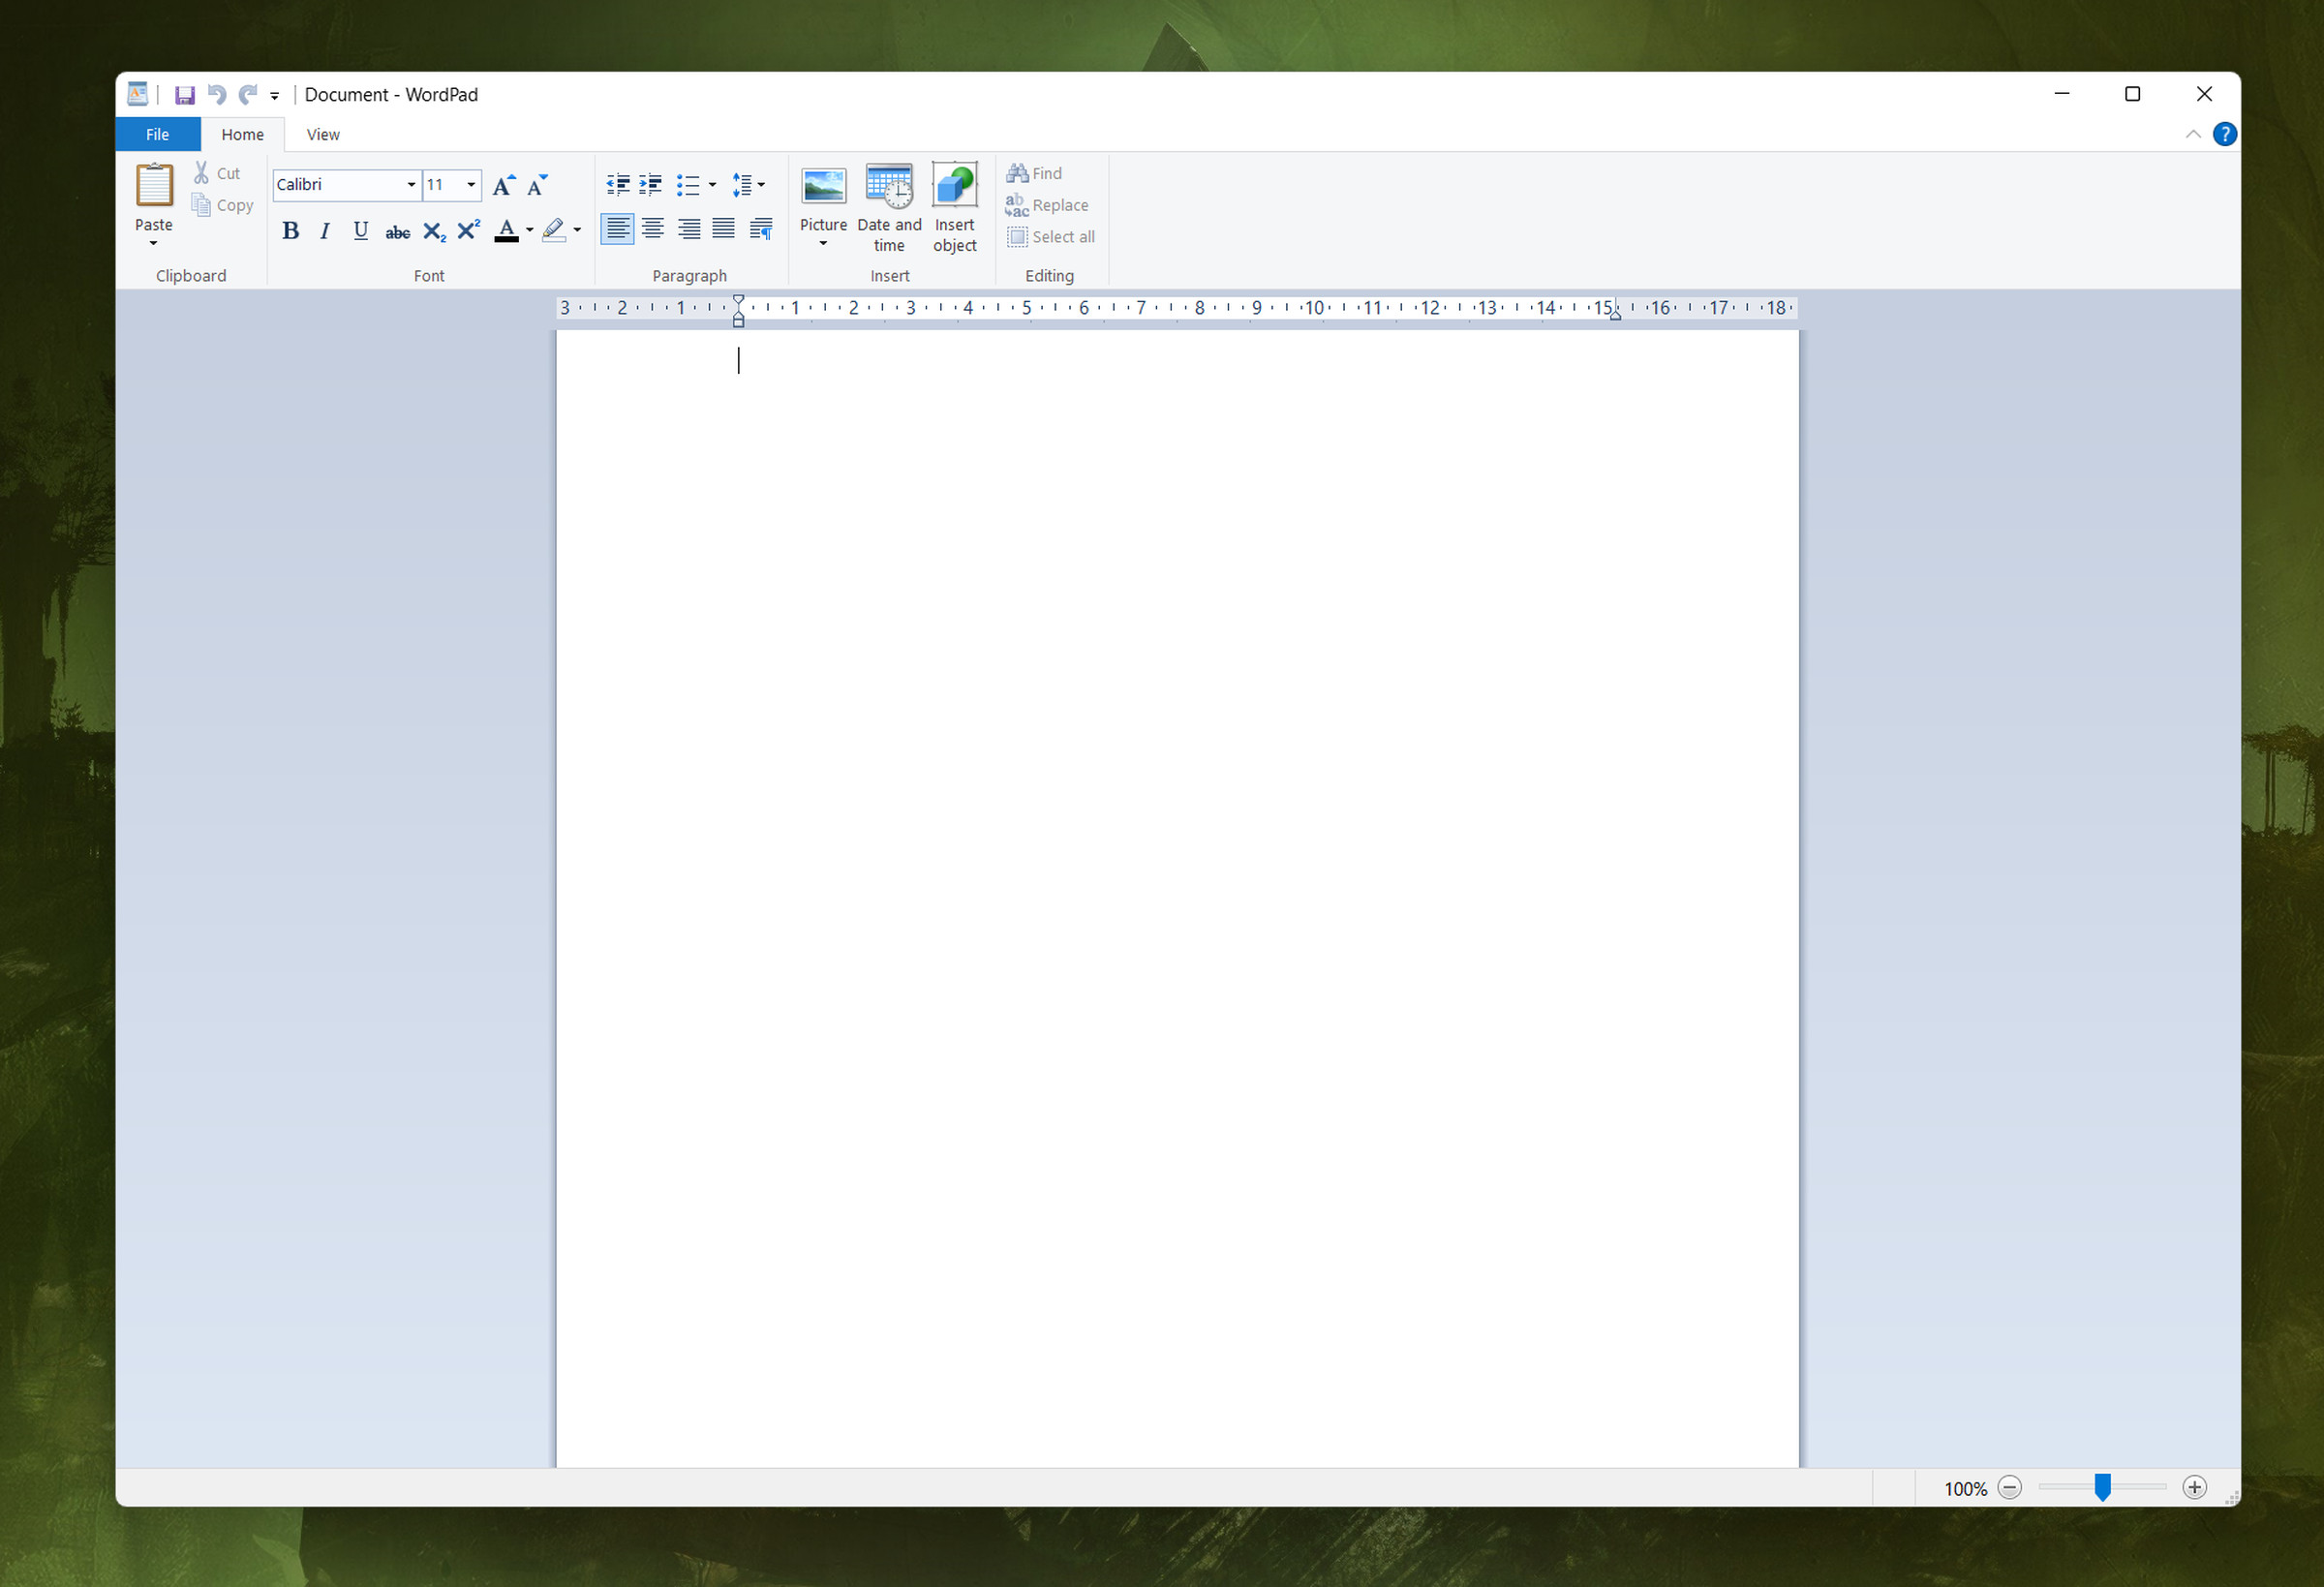 WordPad hasn’t been updated significantly since Windows 8.